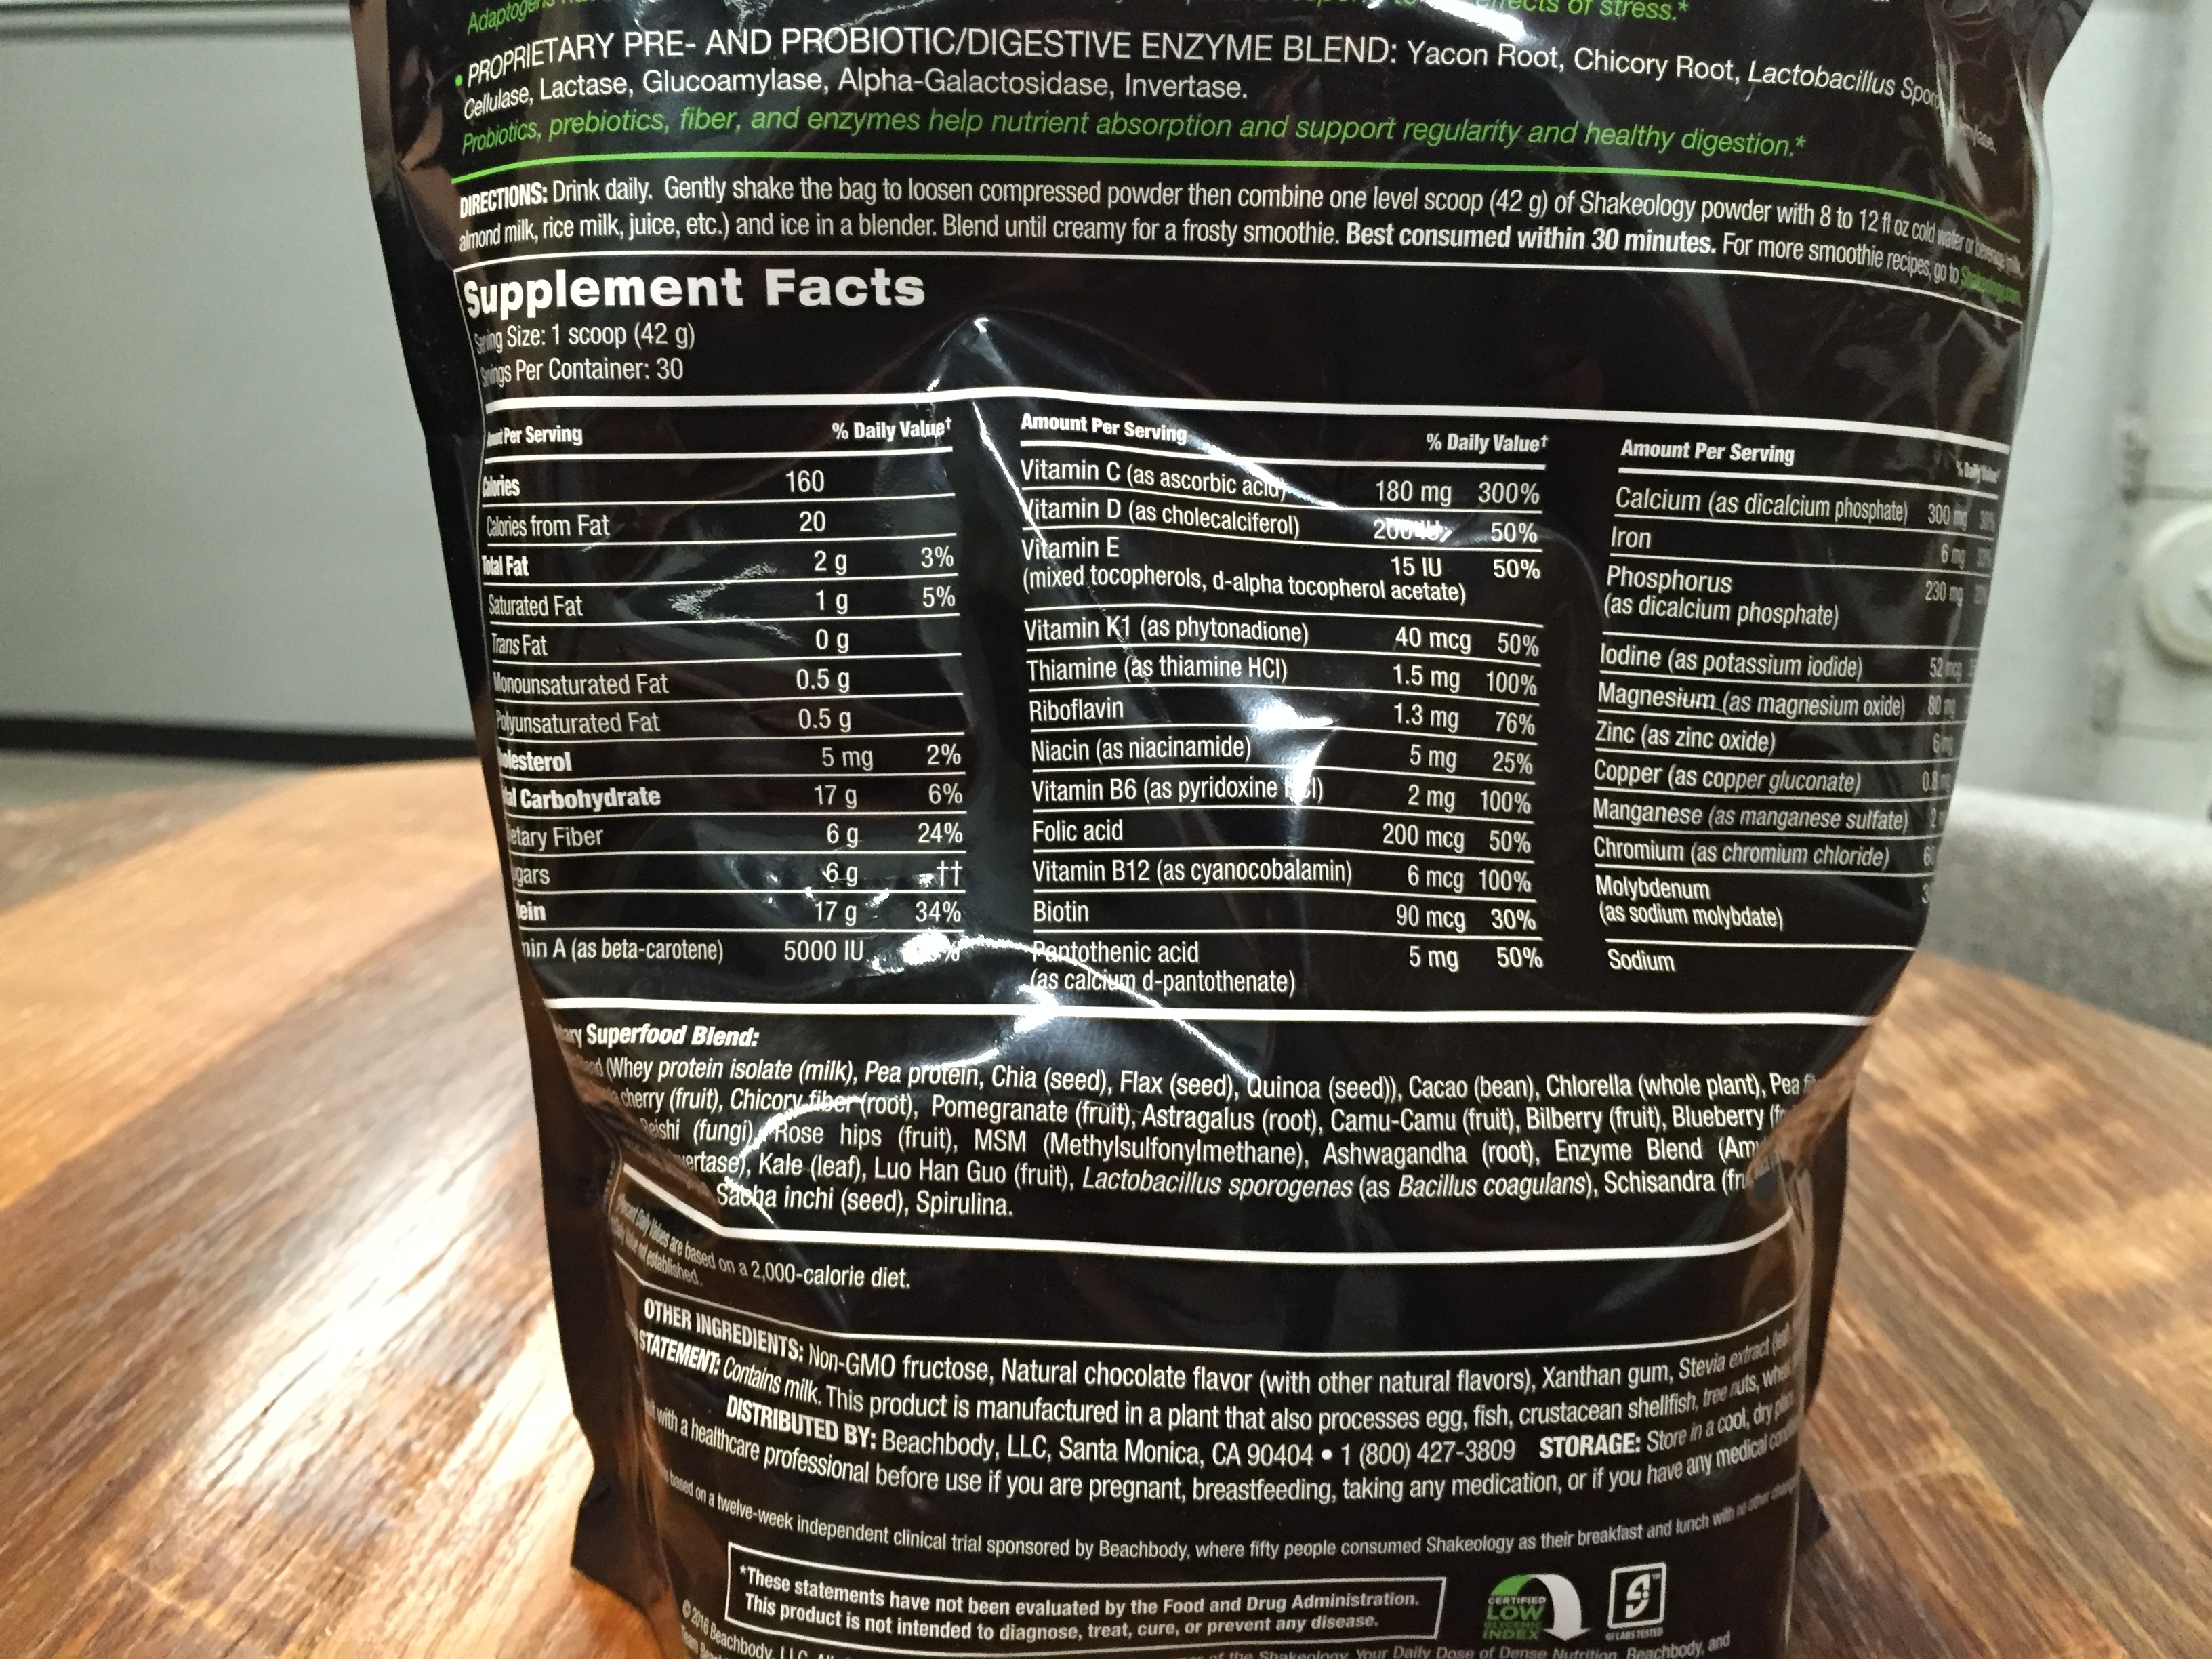 7 Easy Facts About Shakeology Boost: Program Details - Beachbody's Faq Shown